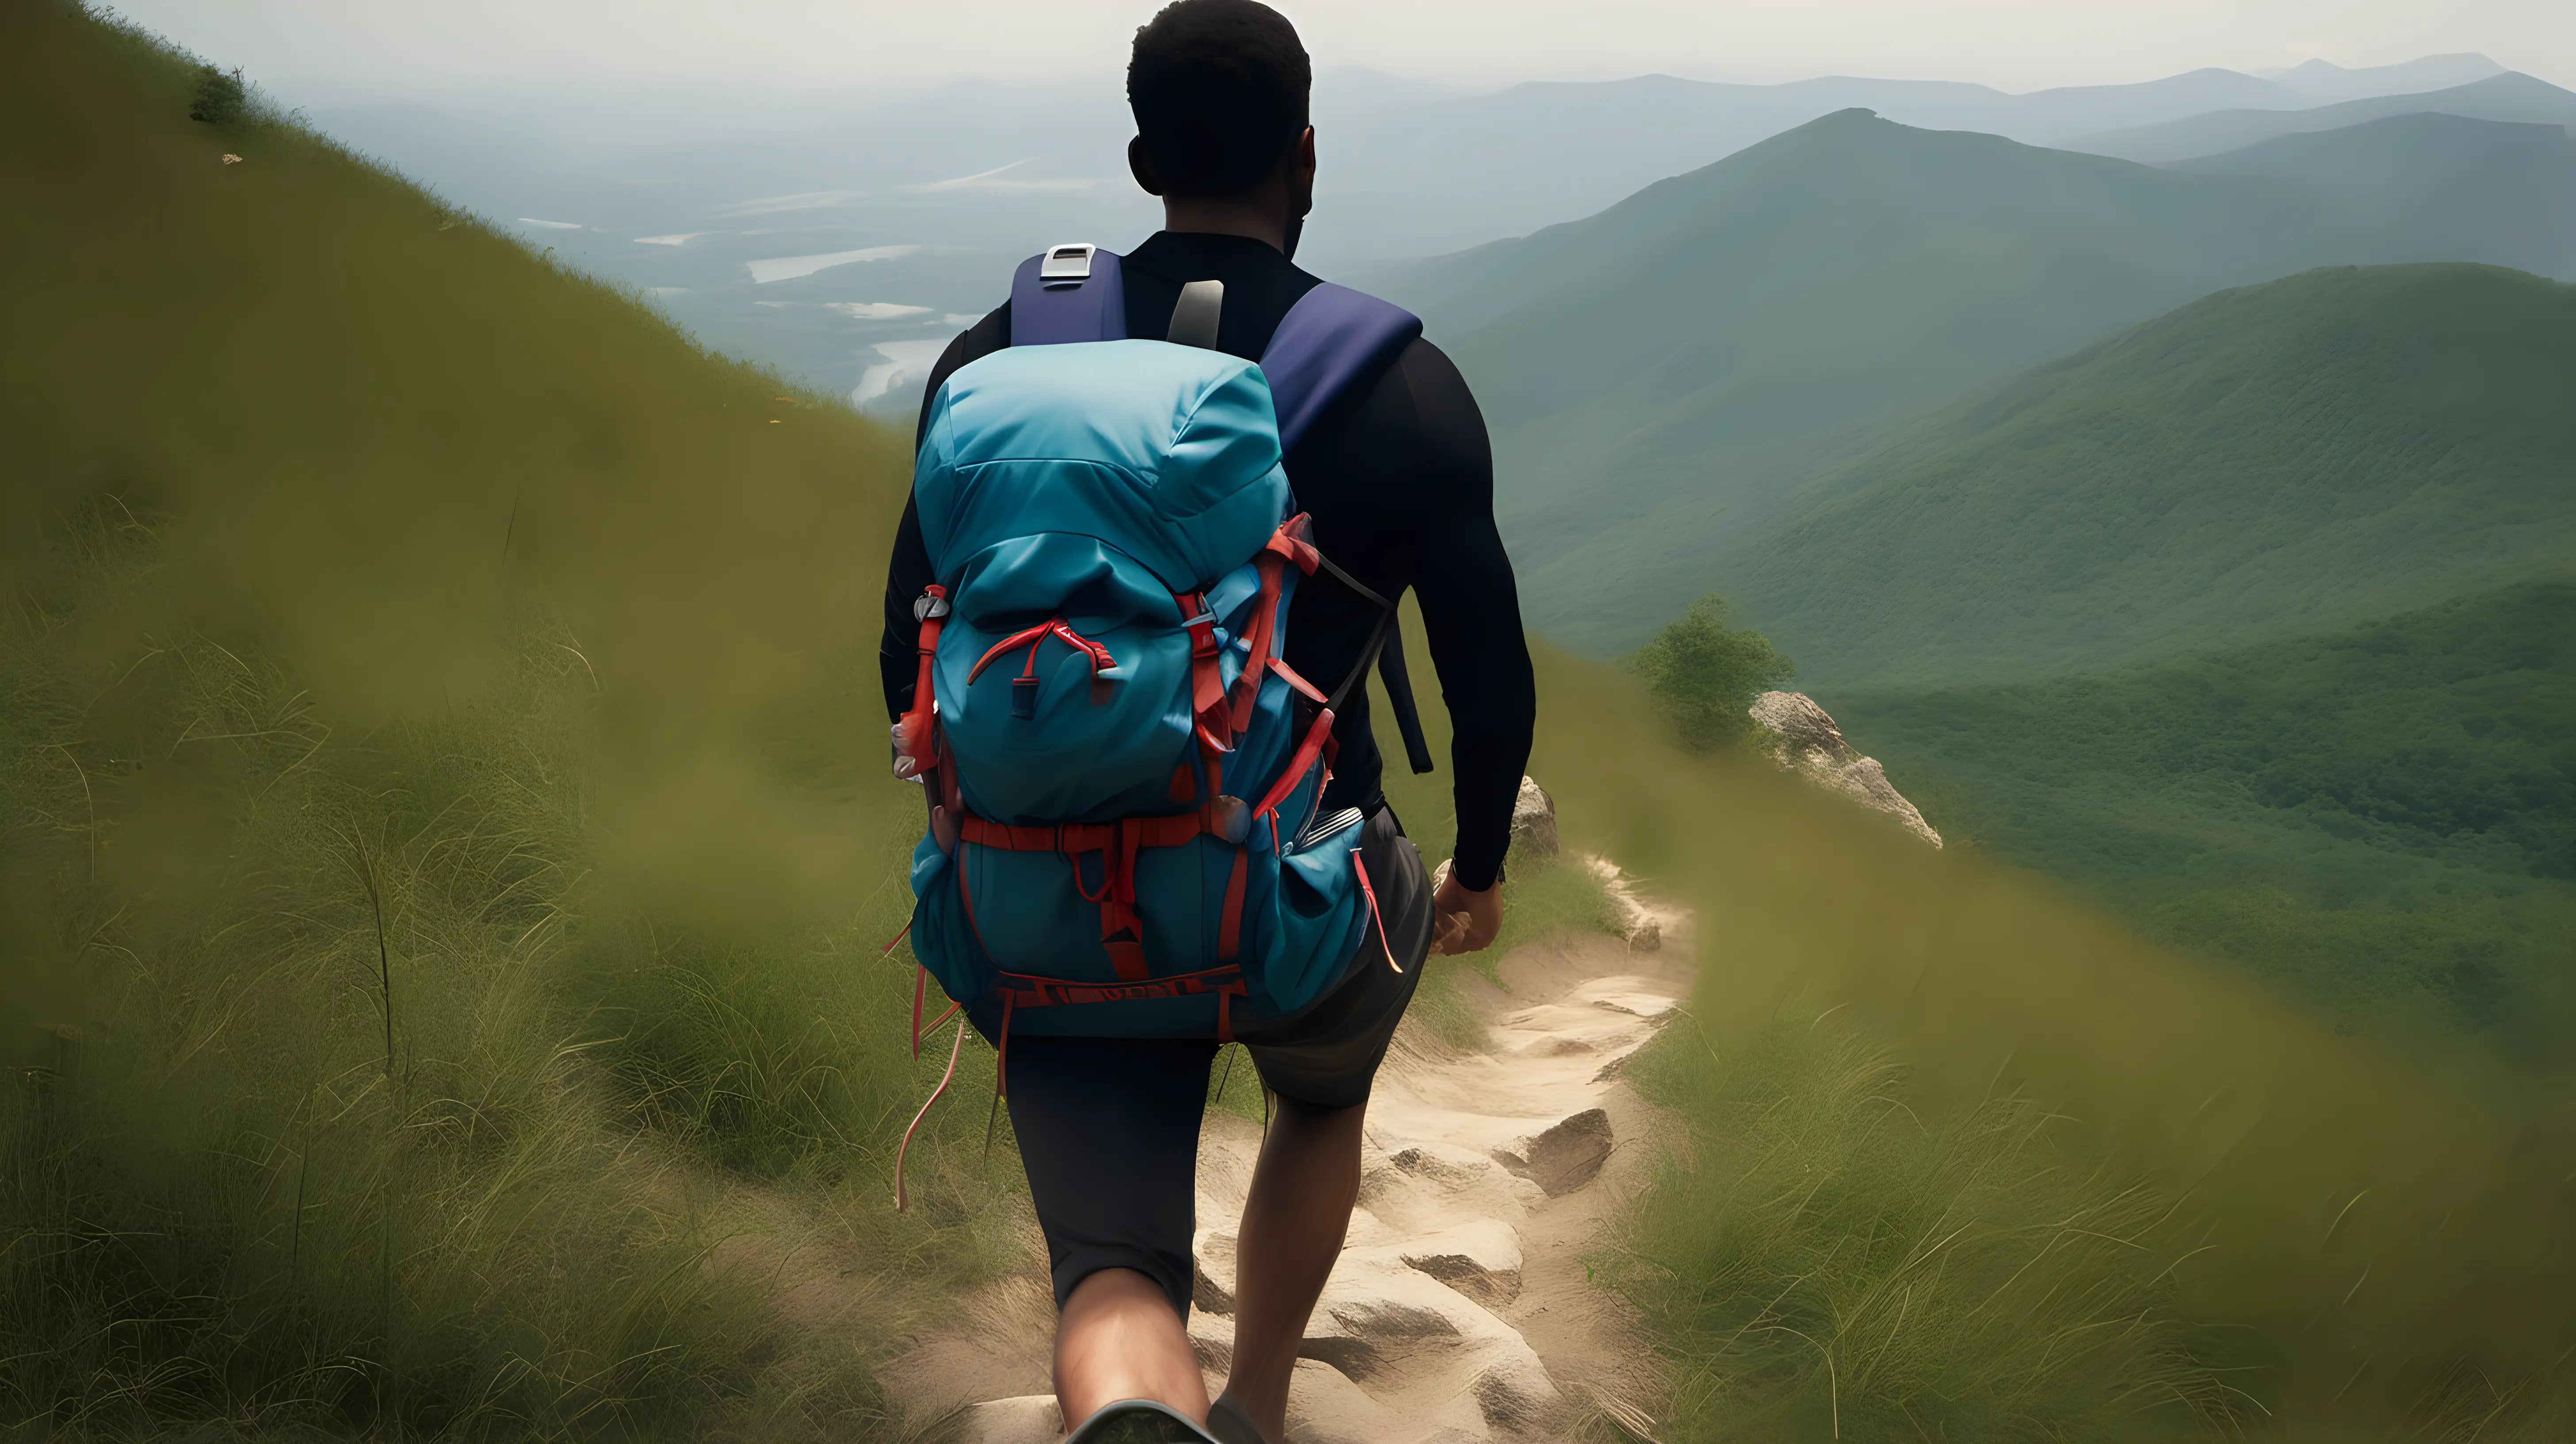 The back view of a person climbing a hill, their muscles defined by the strain, sweat marks visible on their backpack straps.